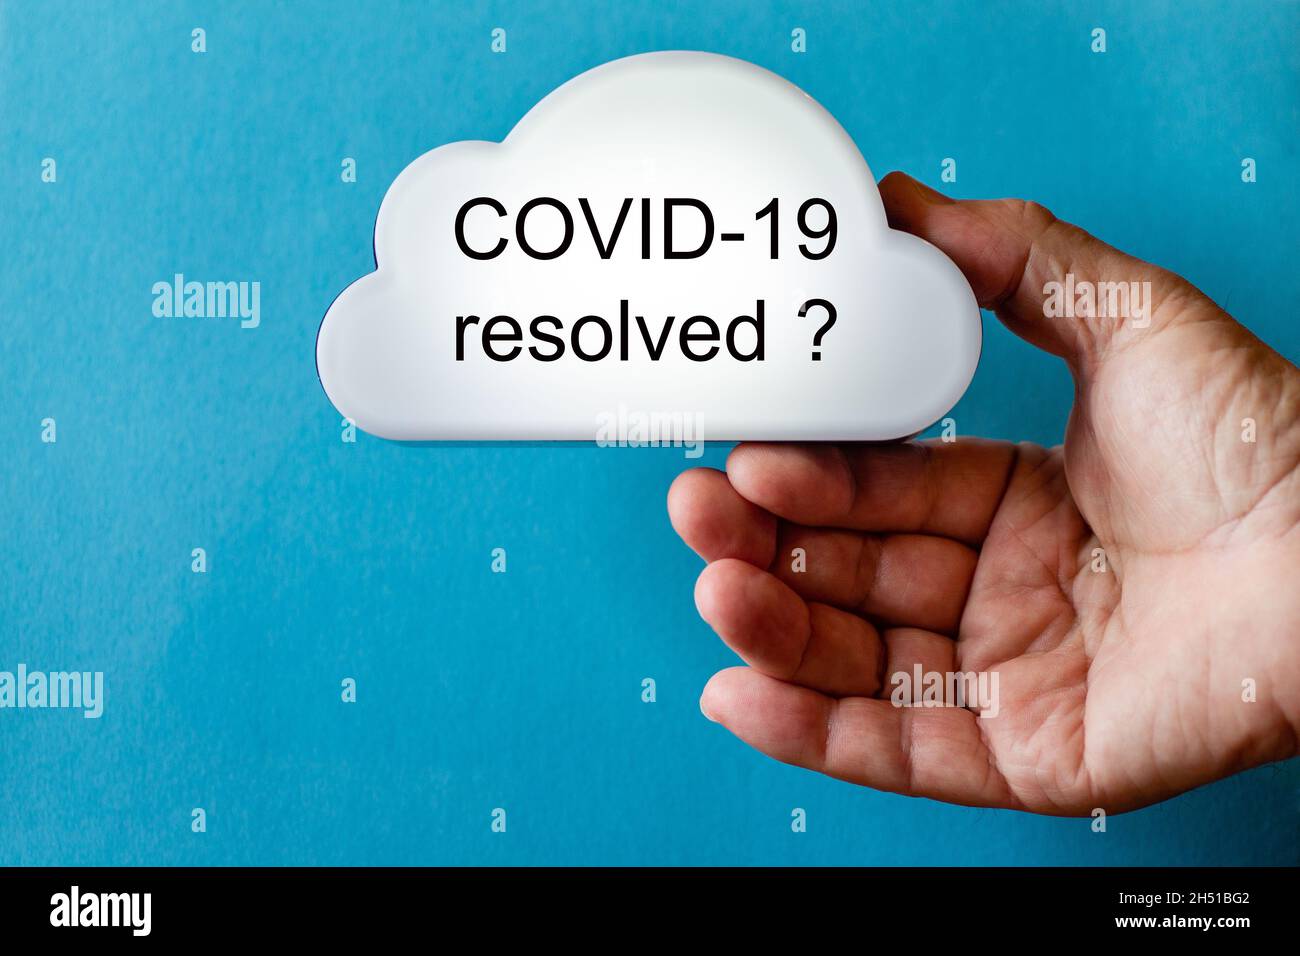 Hand holds a white cloud symbol against a blue background. The text is written on the cloud: COVID-19 resolved ? Stock Photo